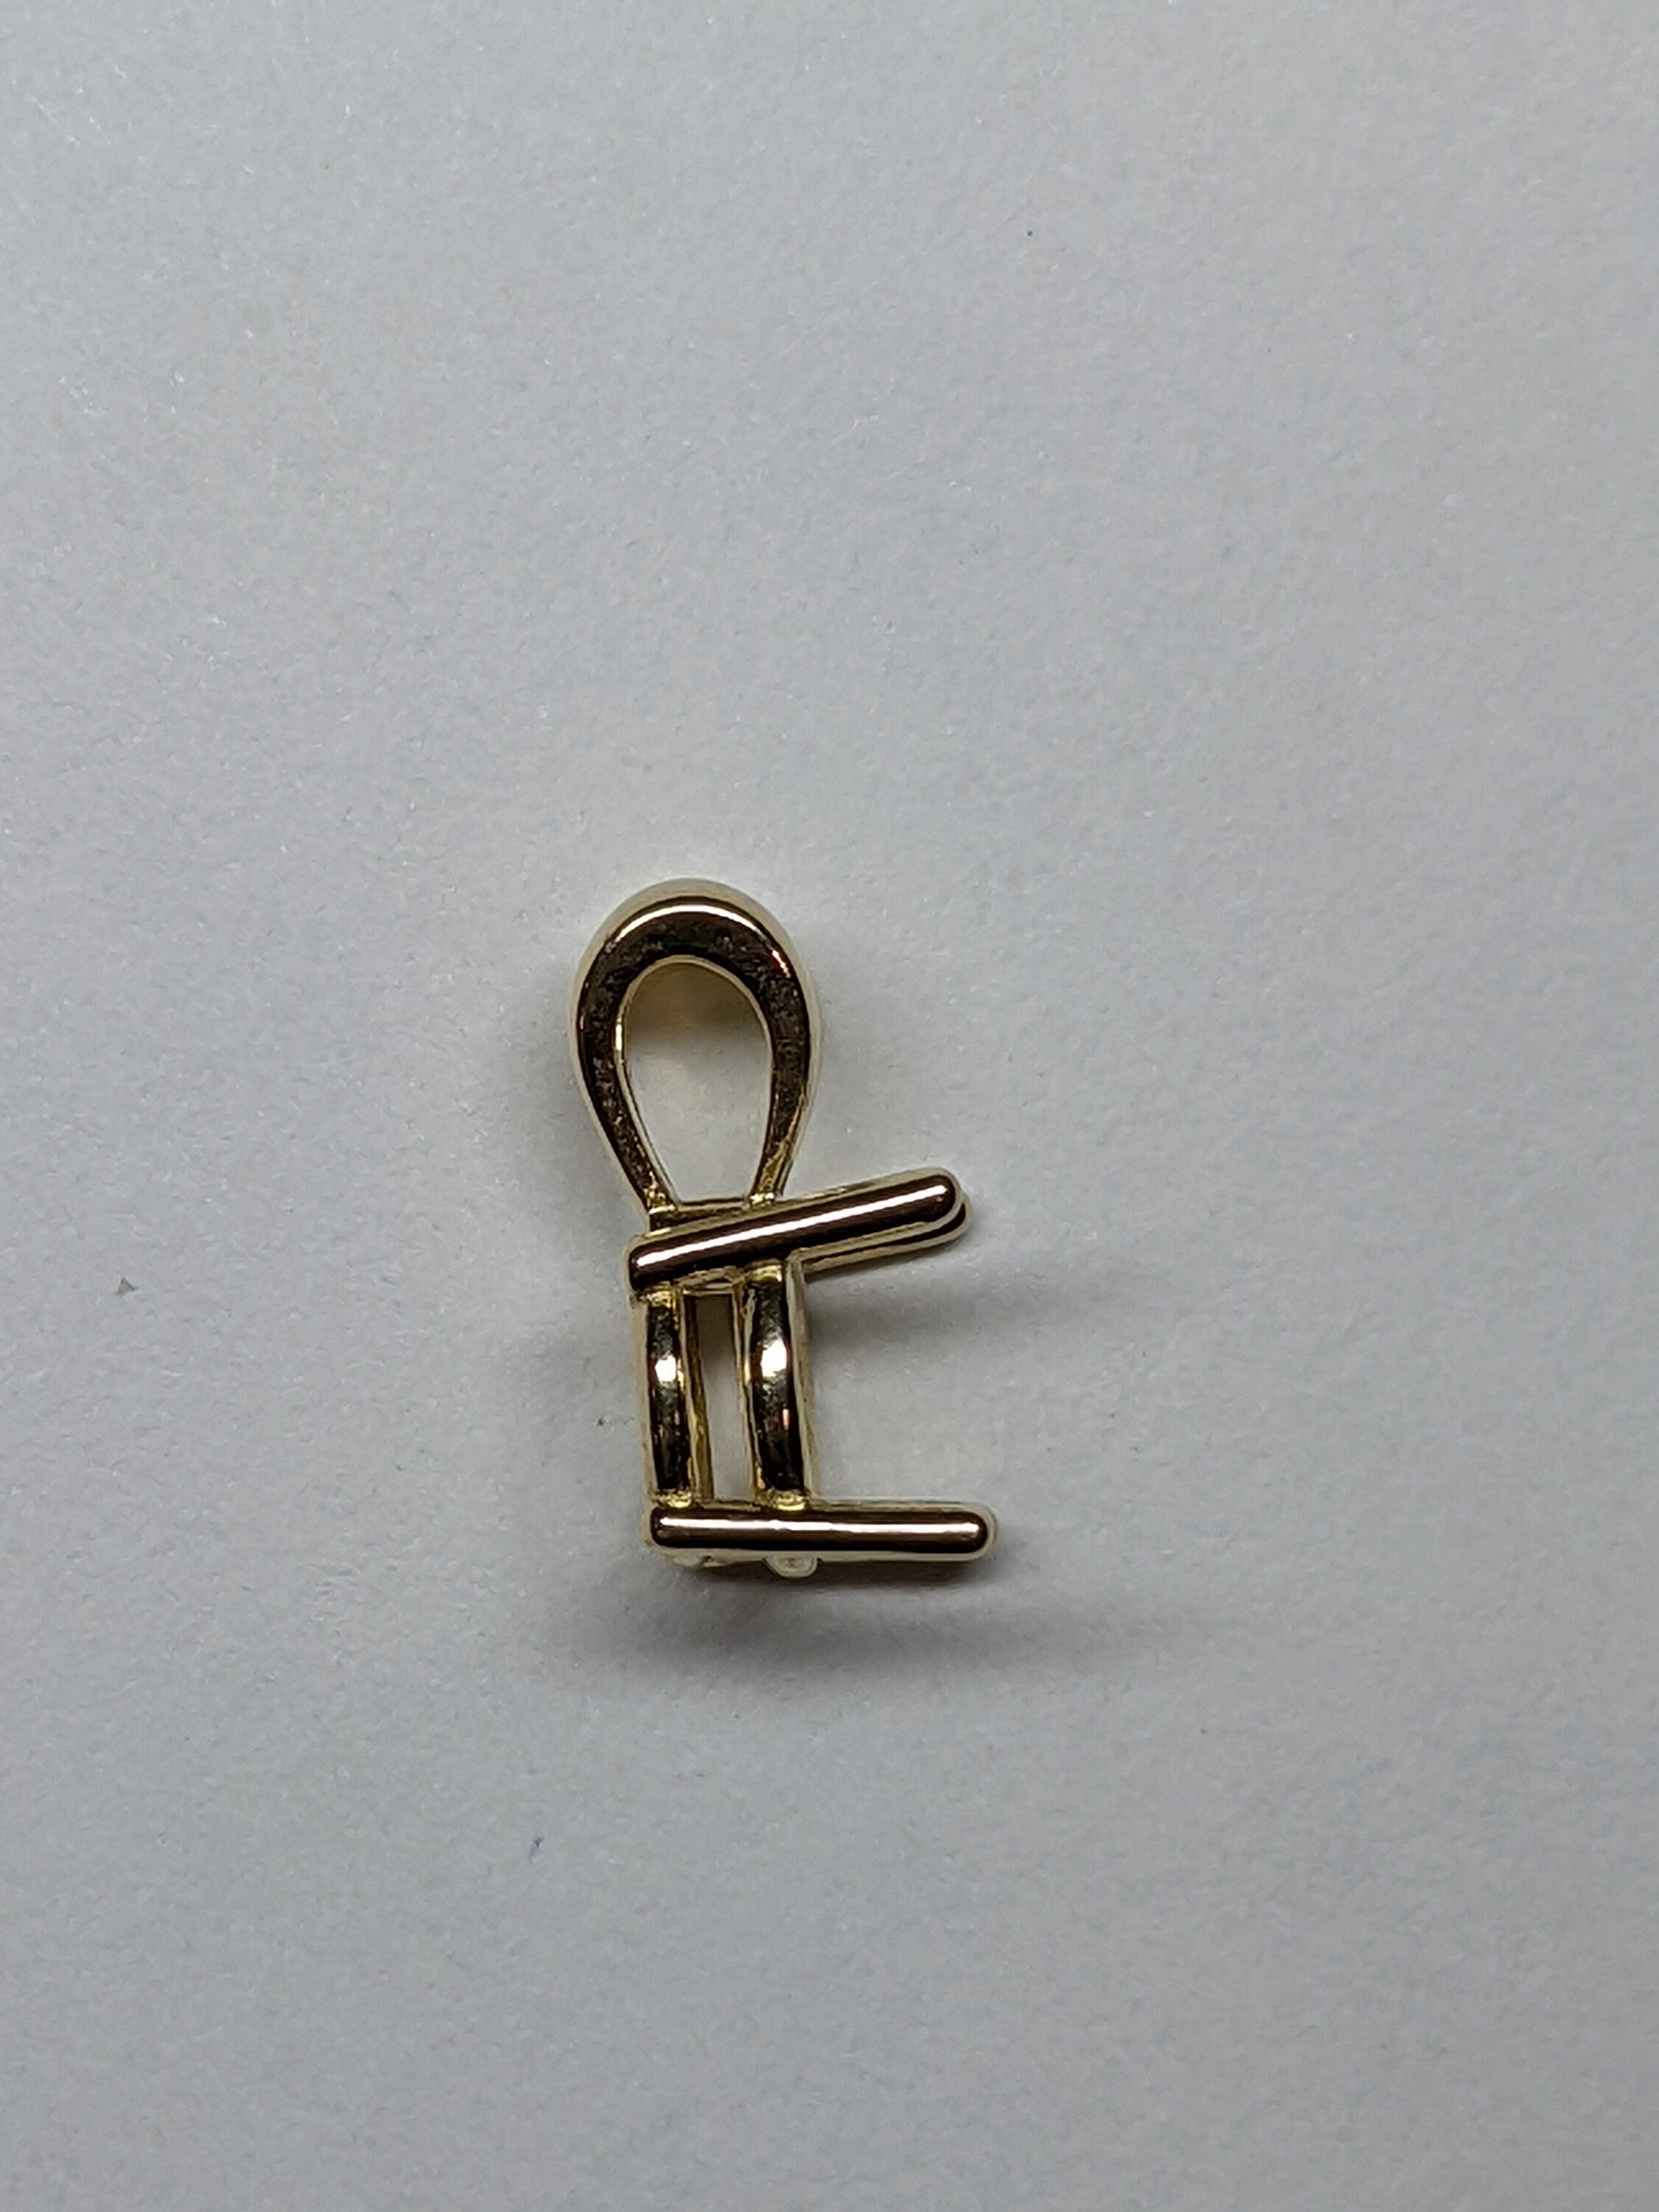 Minimalist 14K Solid Gold Round Pendant Setting, Finding, Basket | Solitaire Necklace 3.5mm 4mm 5mm 6mm 6.5mm 7mm 8mm 9mm | Made in America